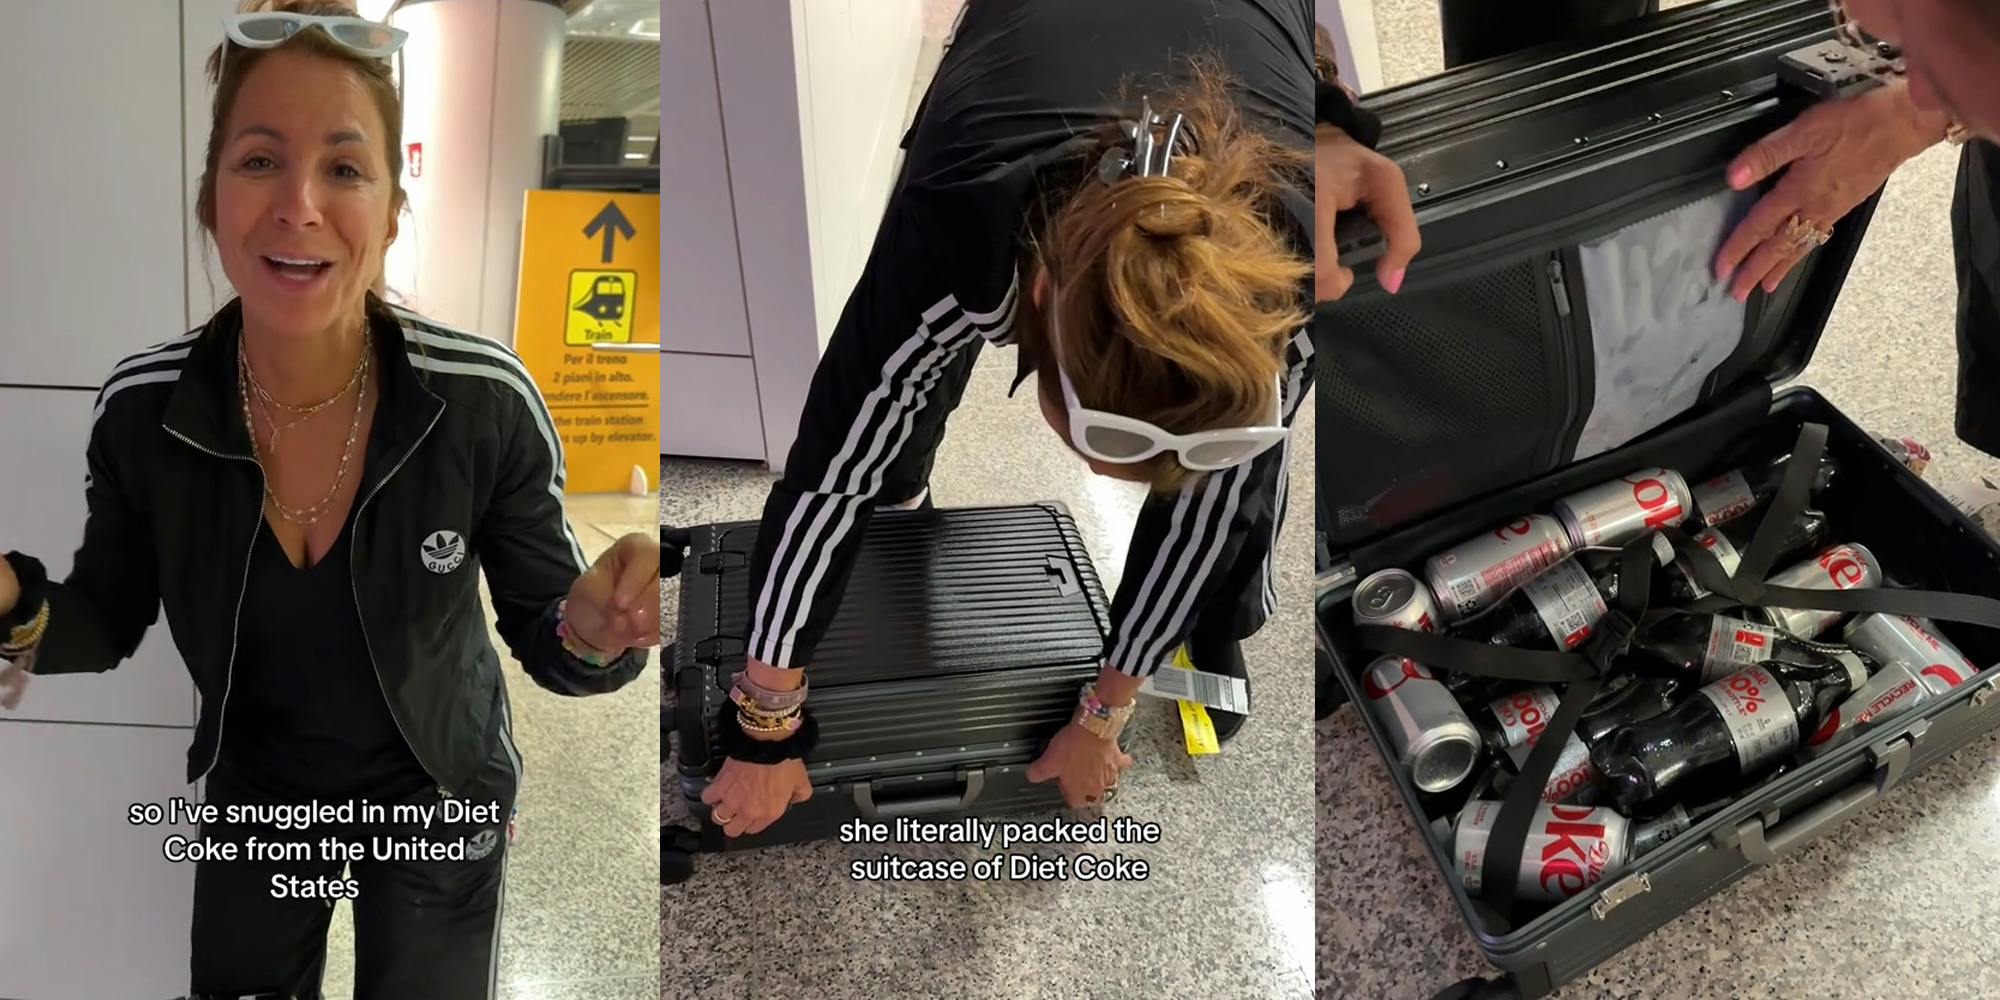 passenger at airport with caption "so I've snuggled in my Diet Coke from the United States" (l) woman with luggage with caption "she literally packed the suitcase of Diet Coke" (c) open suitcase revealing Diet Coke bottles and cans inside (r)